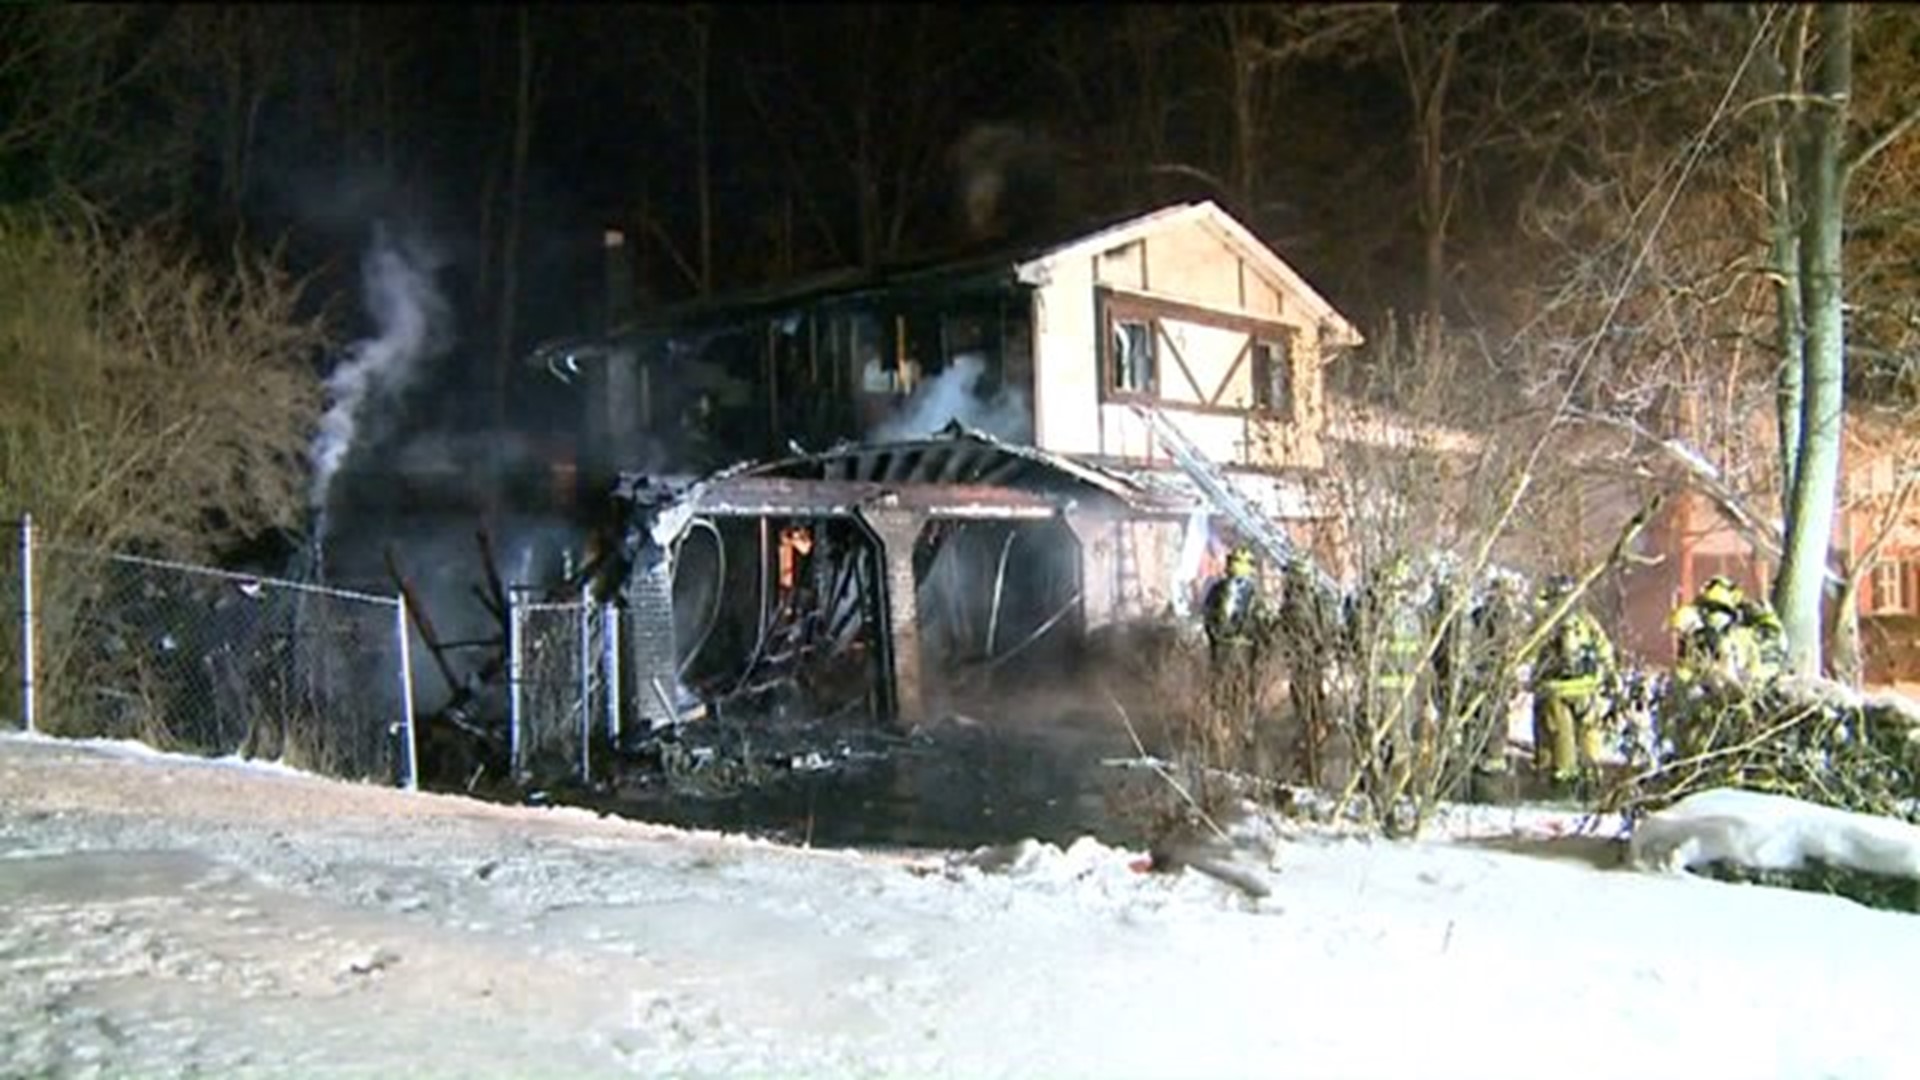 Man Displaced by Fire in Luzerne County